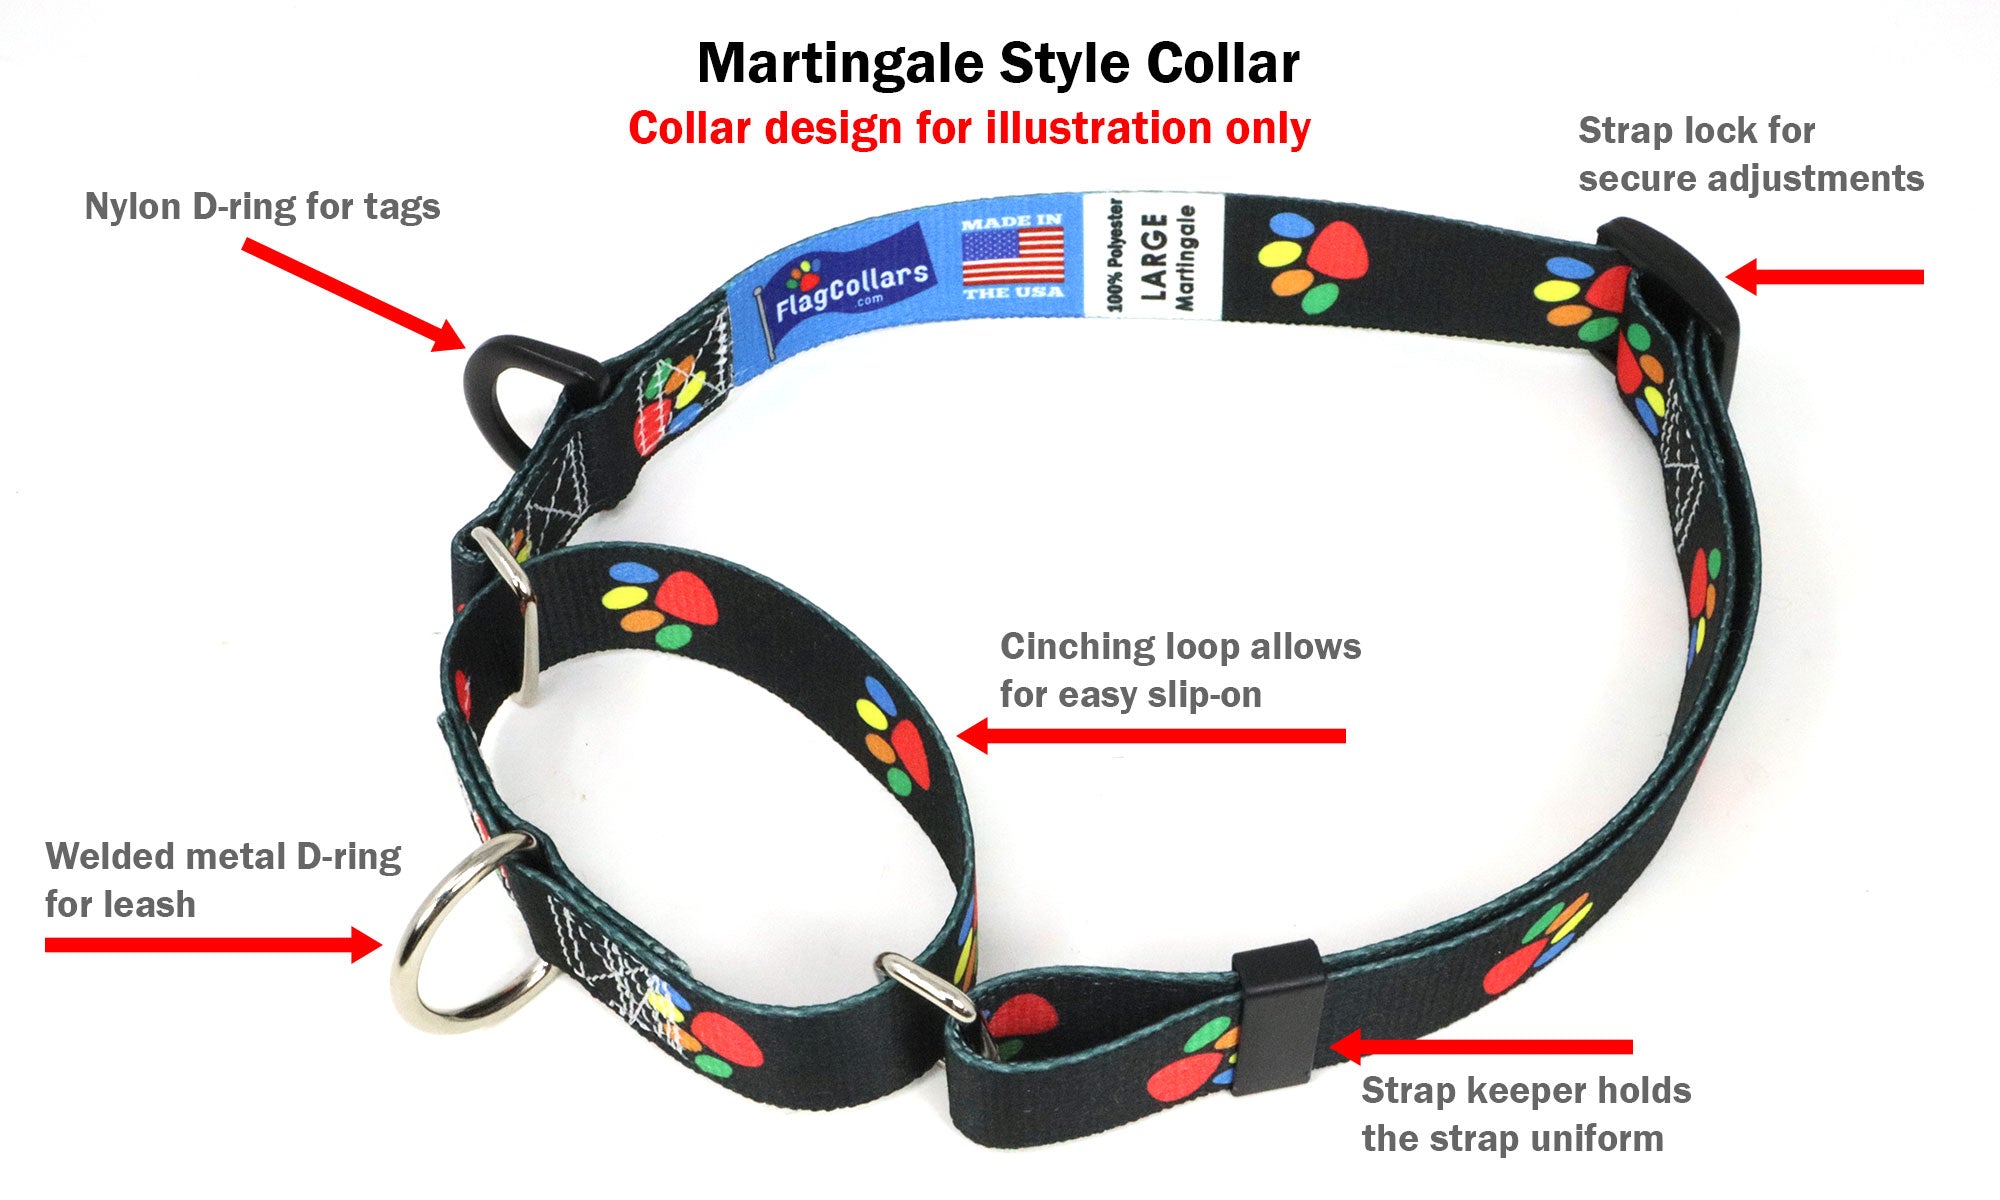 Iceland Dog Collar | Quick Release or Martingale Style | Made in NJ, USA